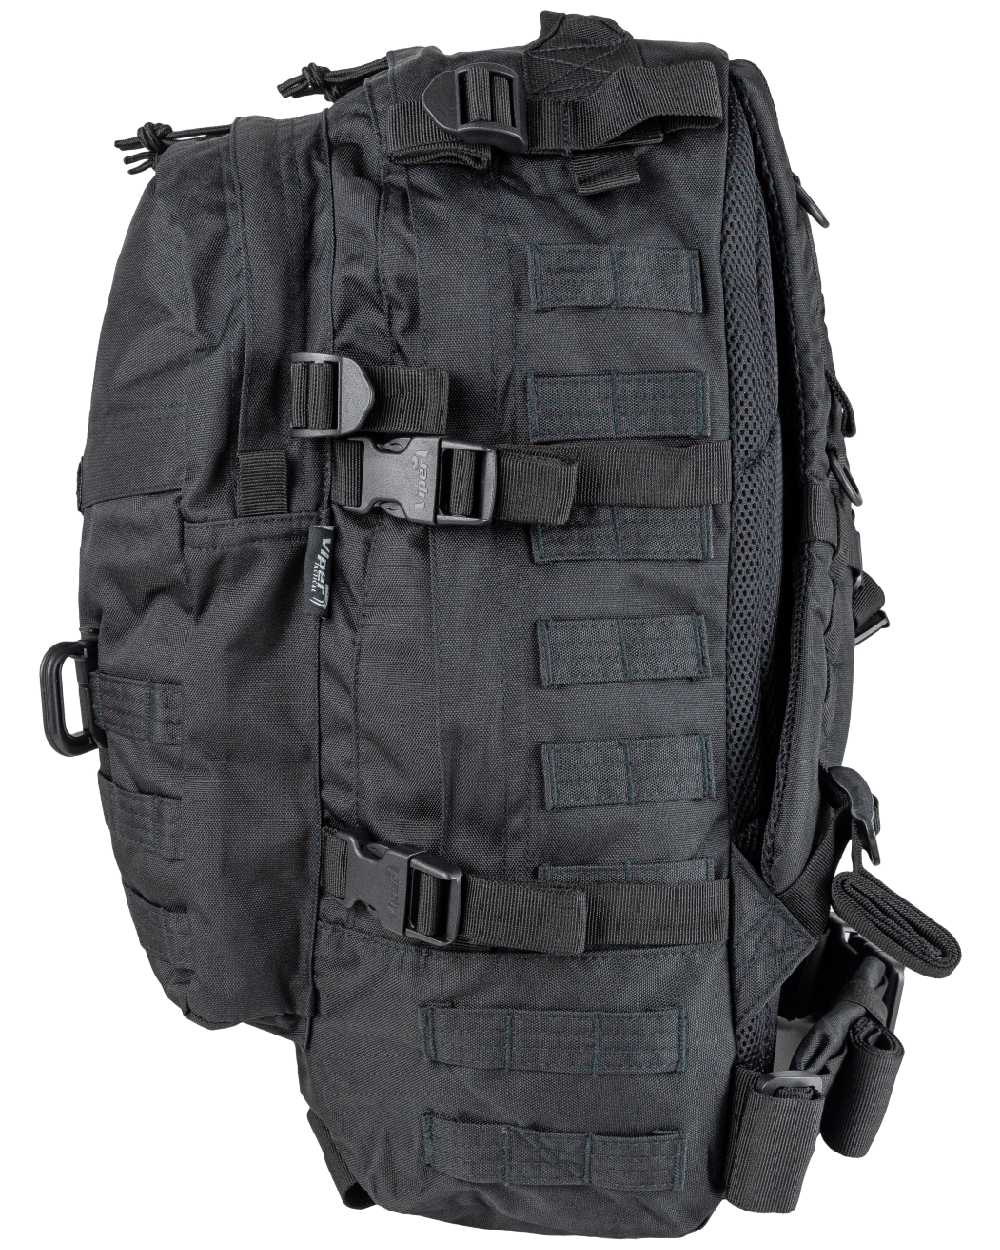 Viper Special Ops Pack in Black 